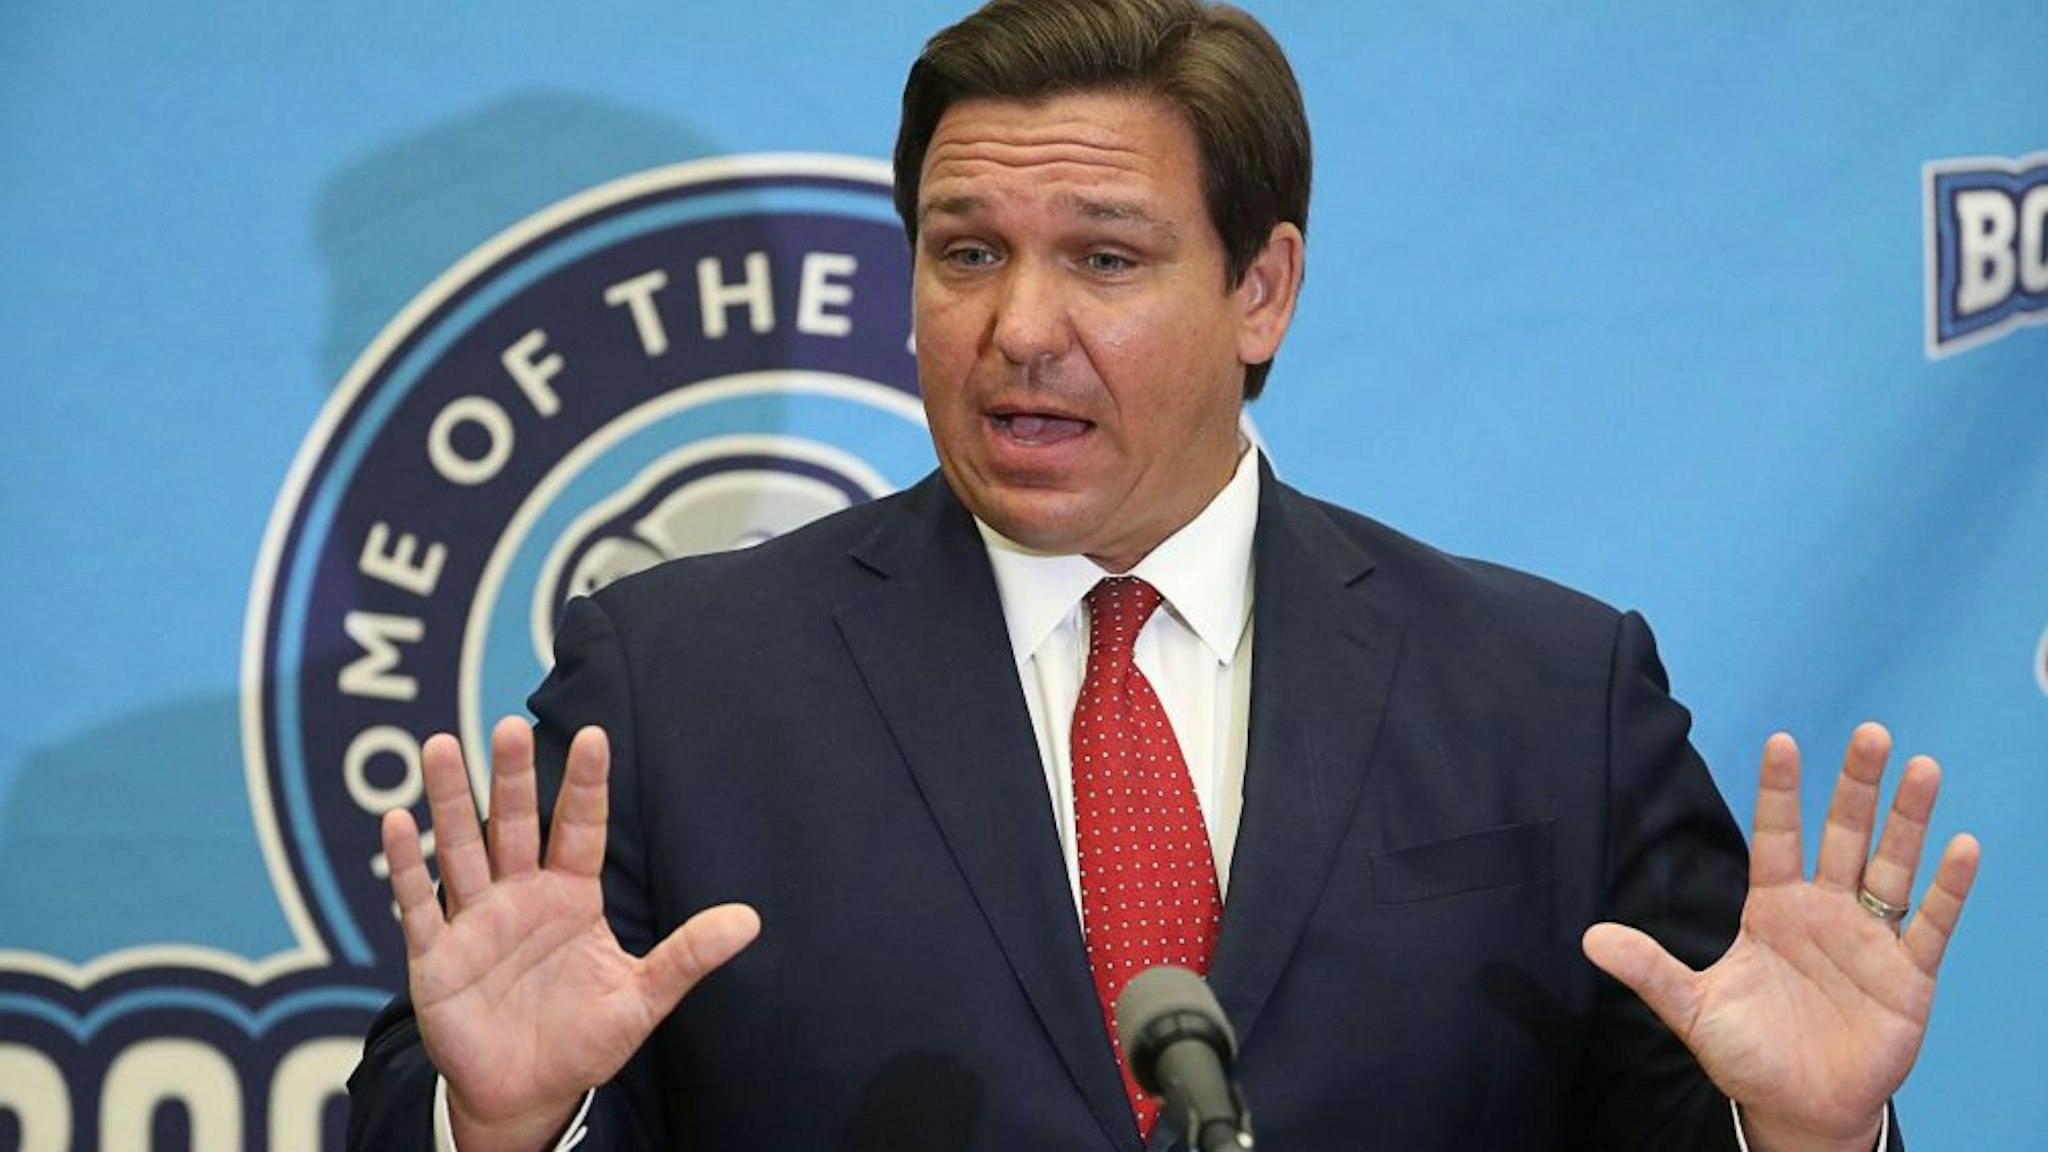 Florida Gov. Ron DeSantis holds a press conference regarding education and COVID-19 at Boggy Creek Elementary School, on Monday, Nov. 30, 2020.